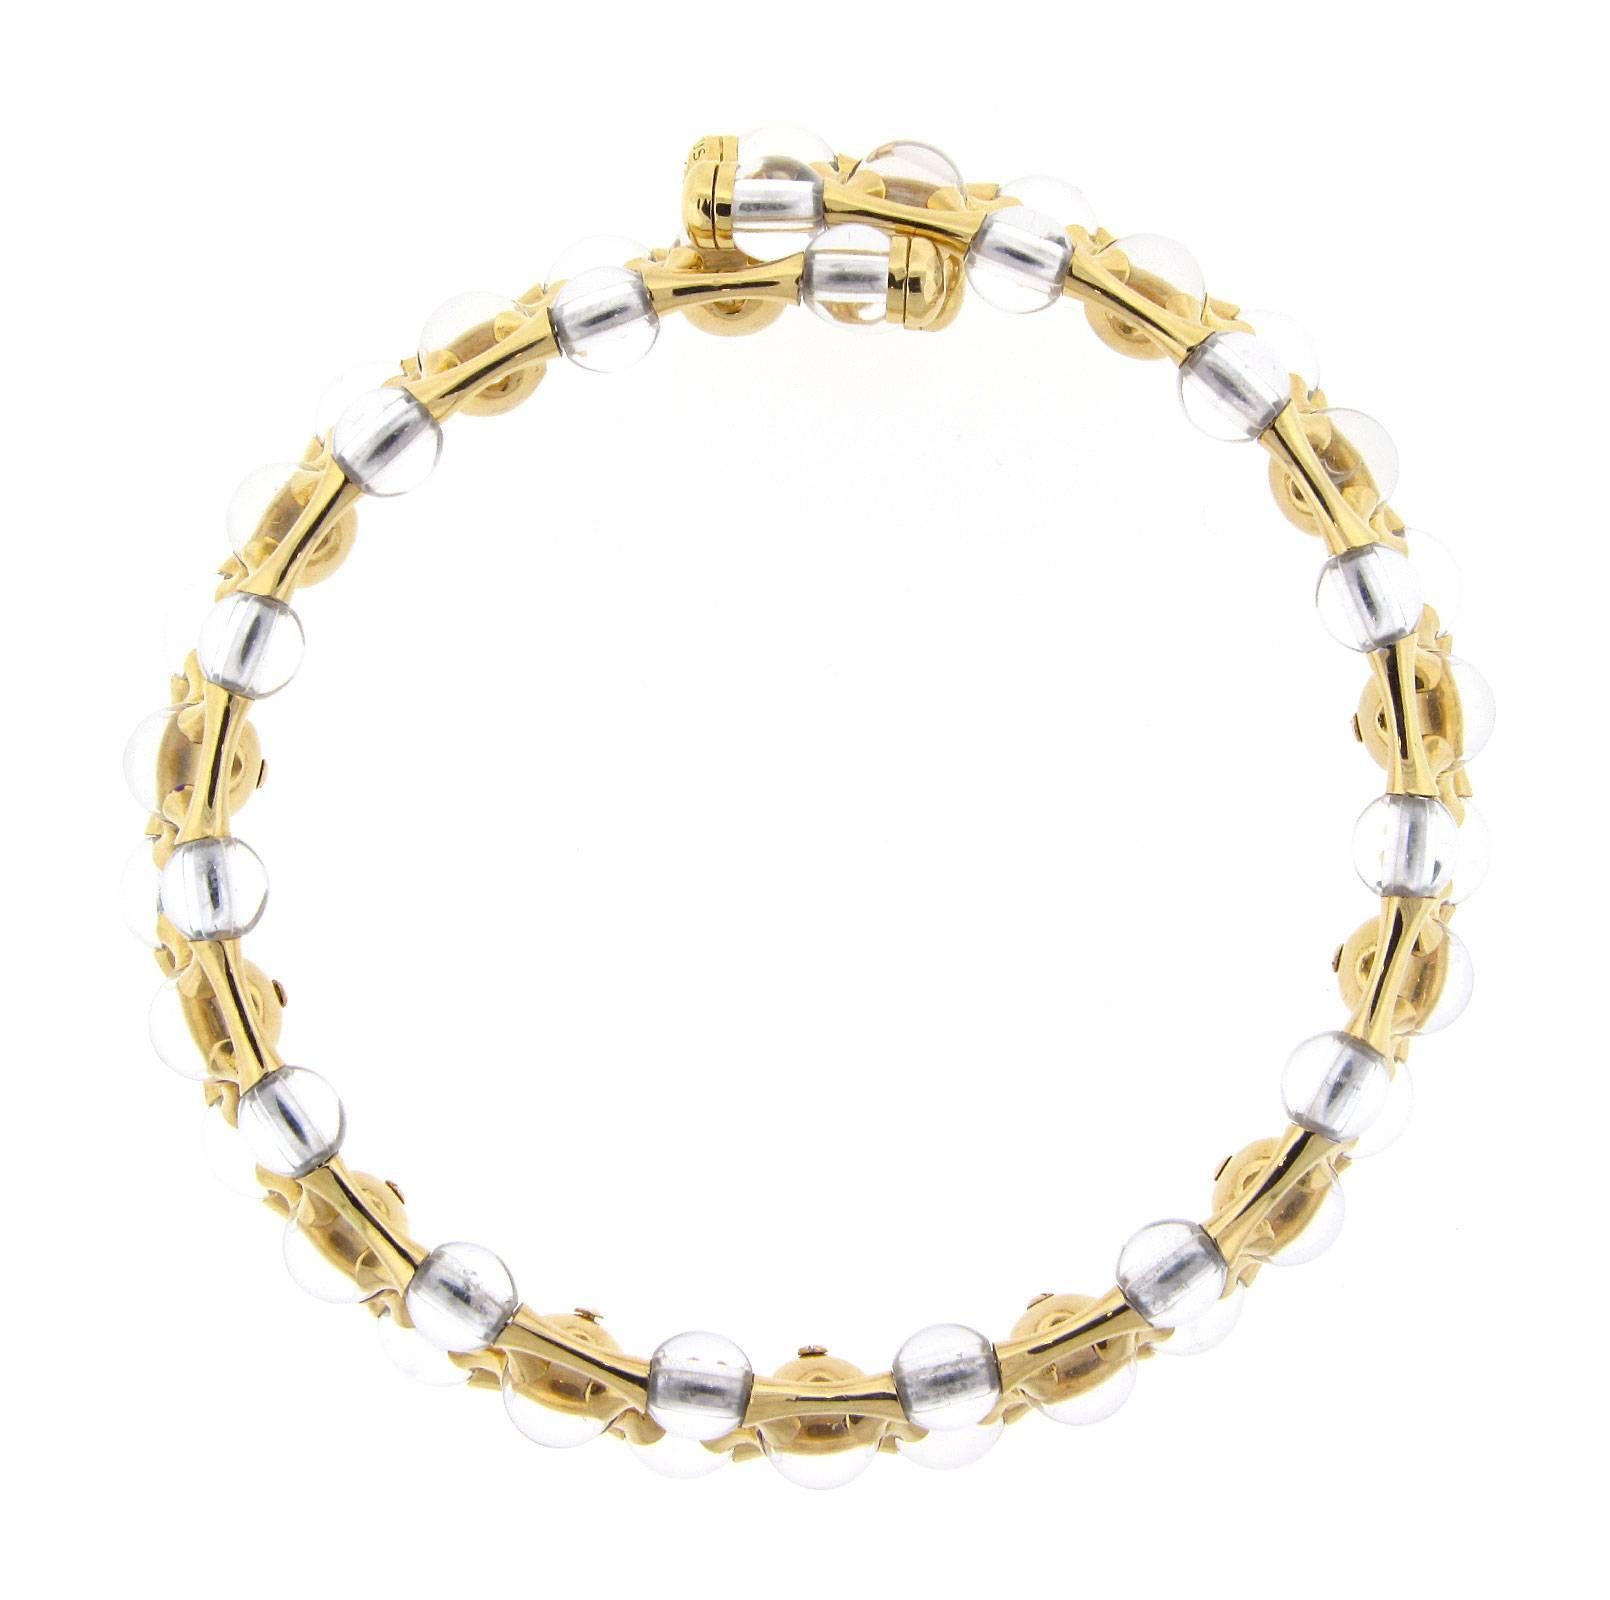 Mauboussin Diamond and rock crystal choker necklace. The necklace is 15 inches in length, made of 18K yellow gold, and weighs 122.1 DWT (approx. 189.89 grams). It also has nine round diamonds. It is also stamped 